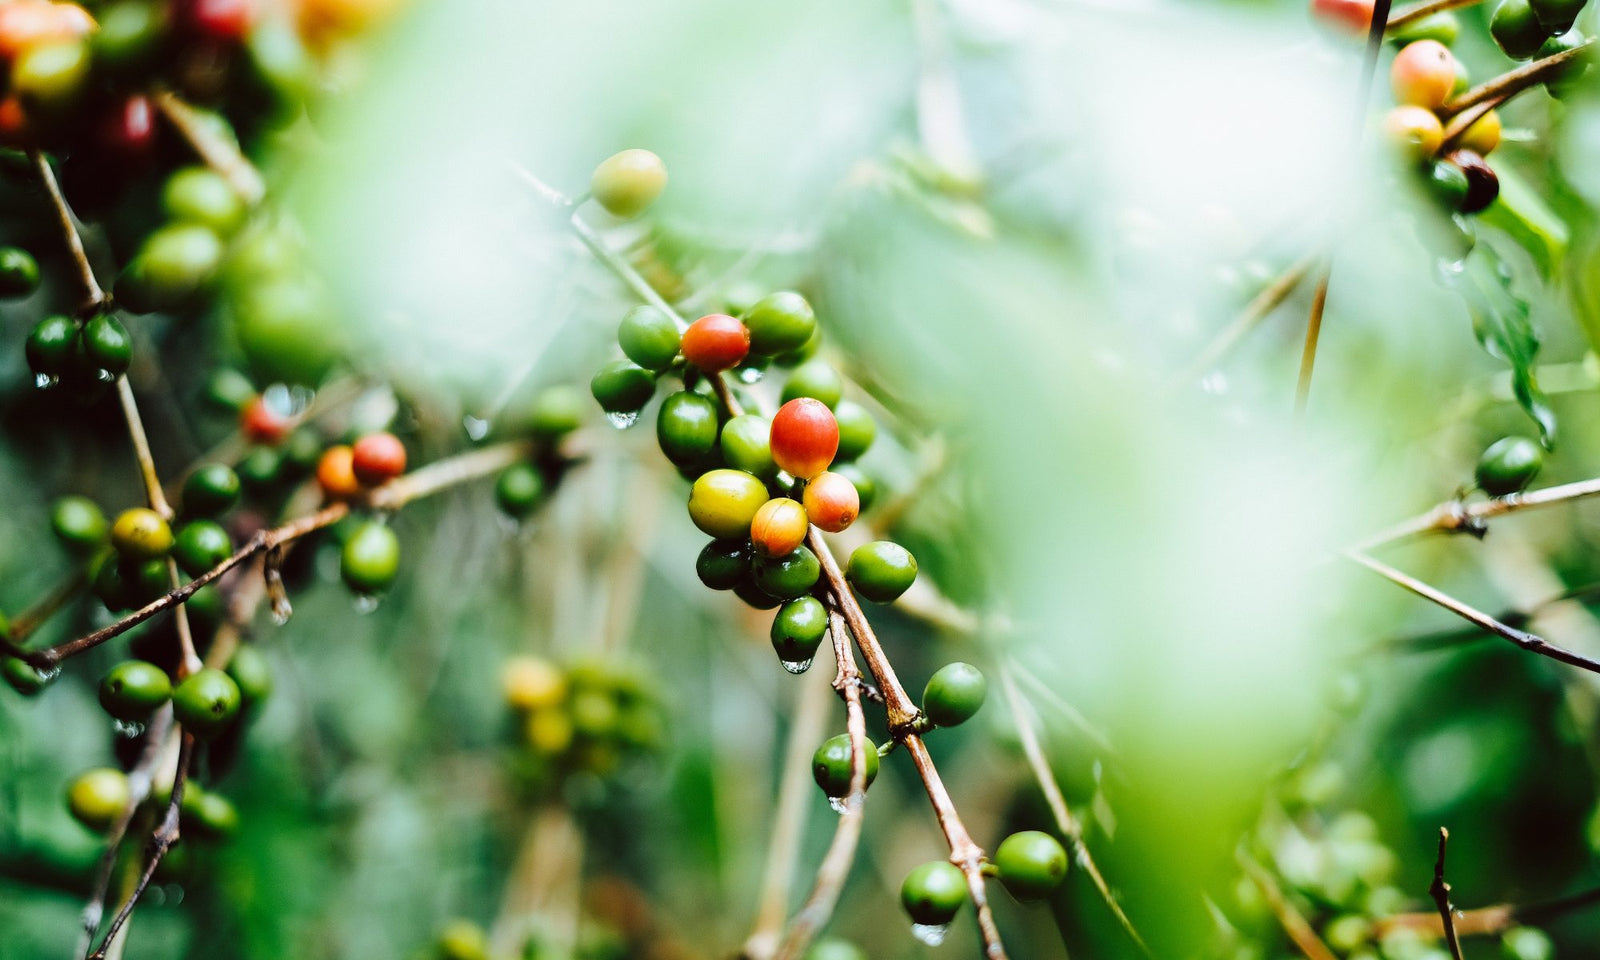 The layout of numerous small Kona coffee farms and mountain terrain requires the coffee cherries to be picked by hand.